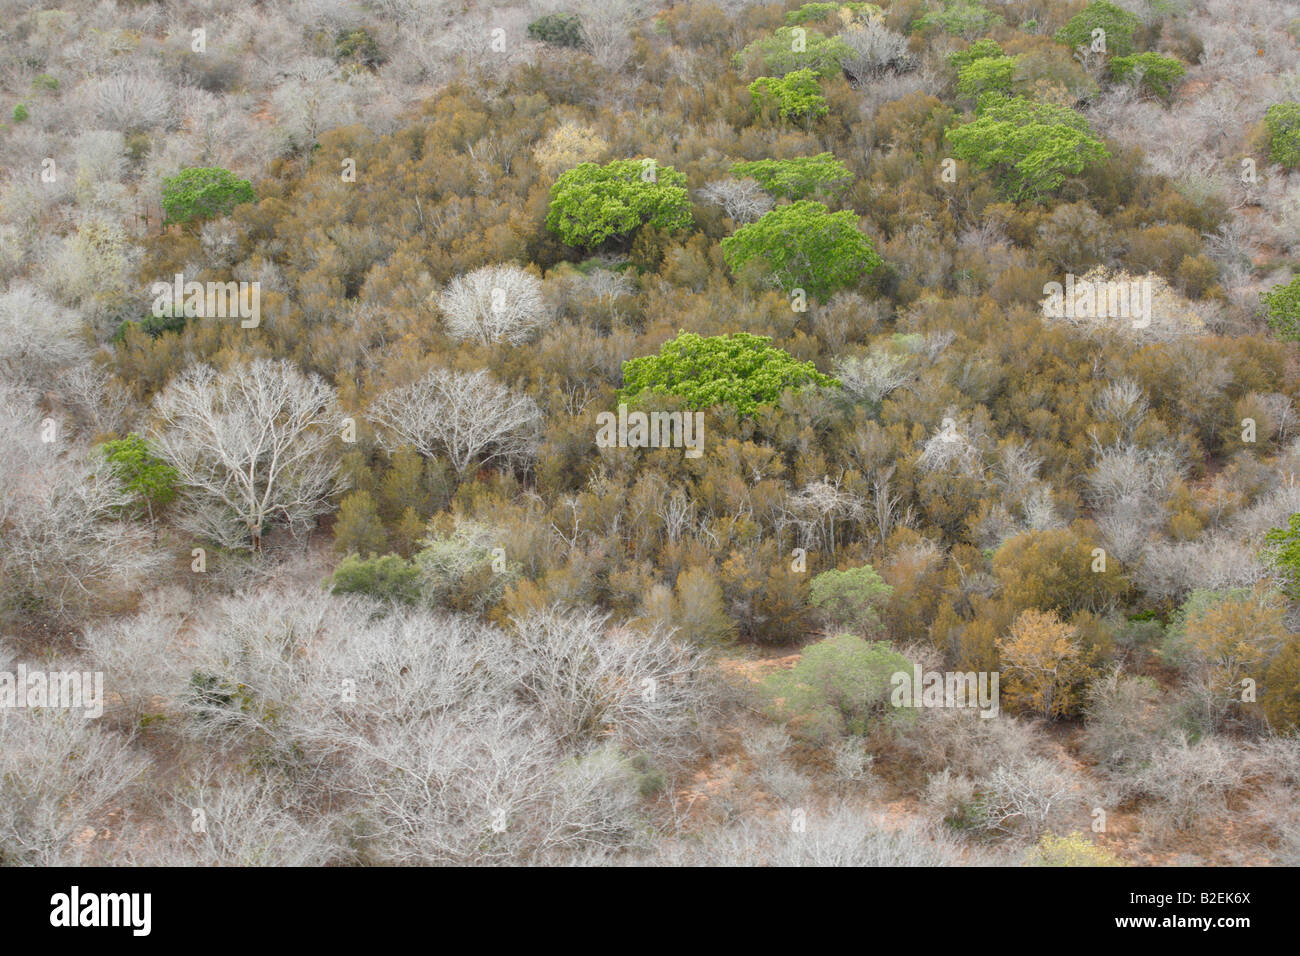 Aerial view of a Lebombo ironwood (Androstachys johnsonii) thicket Stock Photo